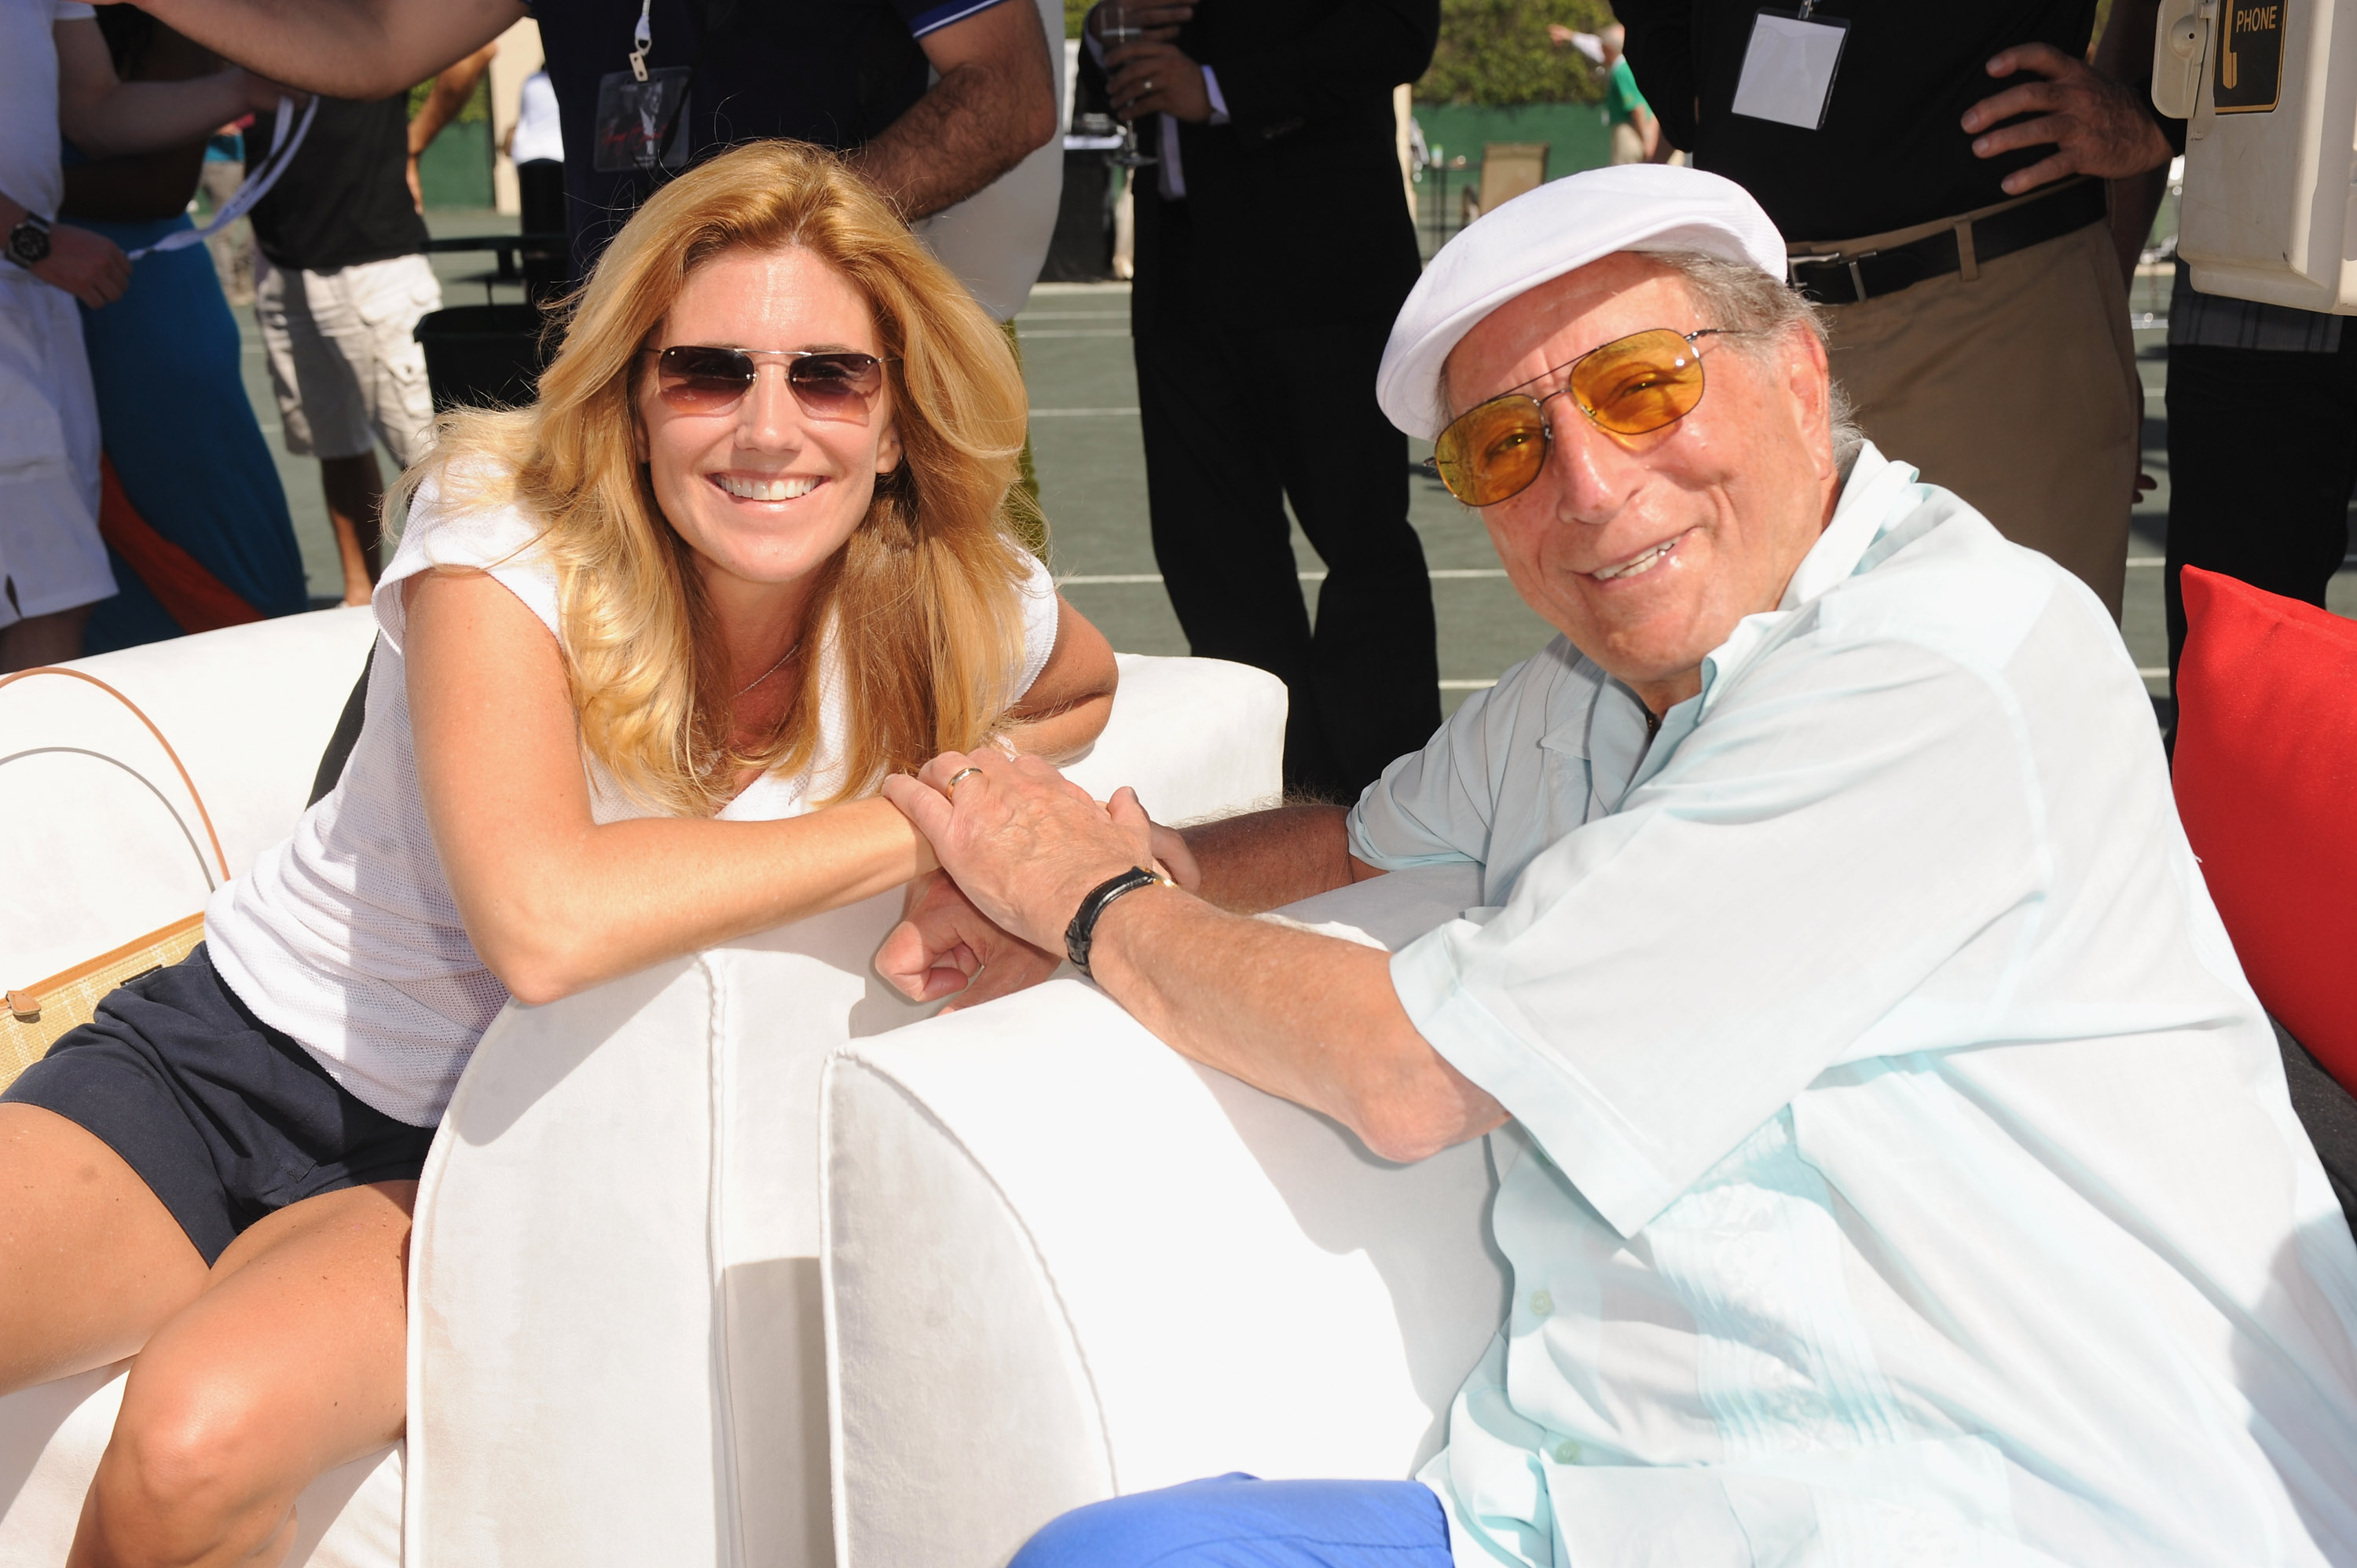 Tony Bennett and Susan Bennett on March 19, 2012 in Key Biscayne, Florida | Source: Getty Images